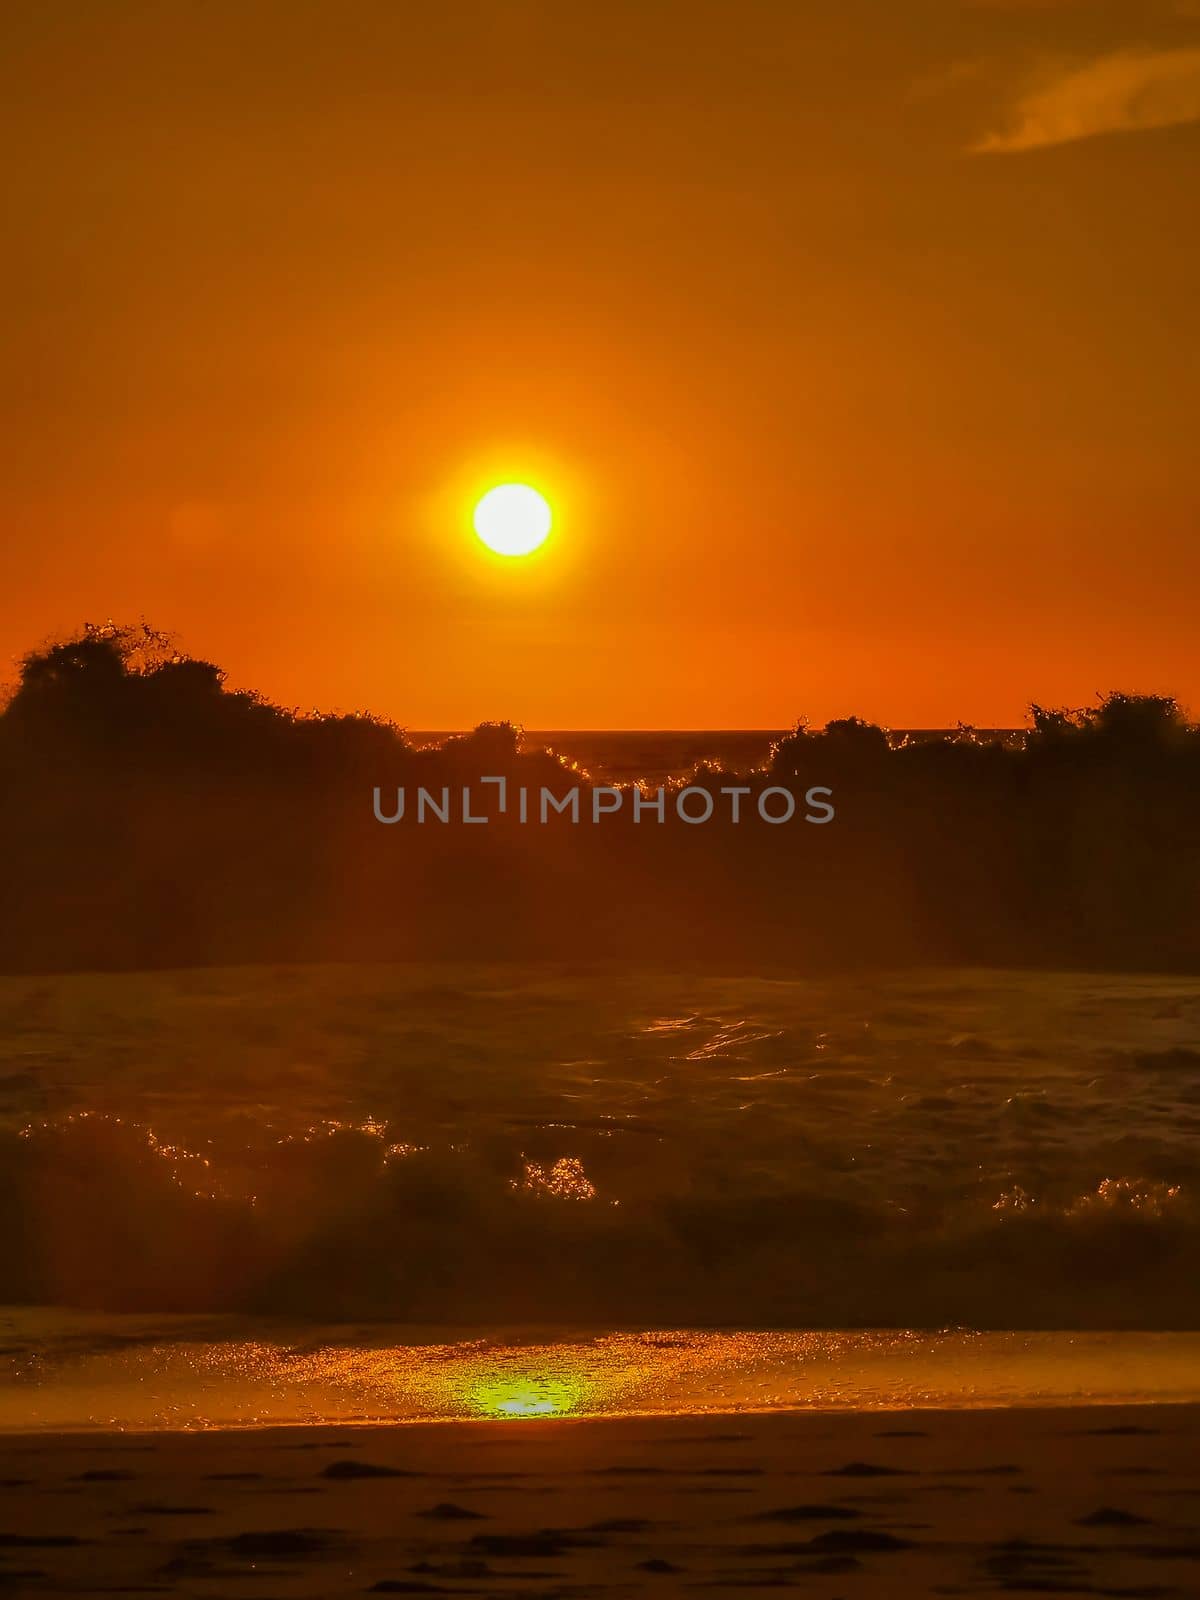 Colorful golden sunset big wave and beach Puerto Escondido Mexico. by Arkadij